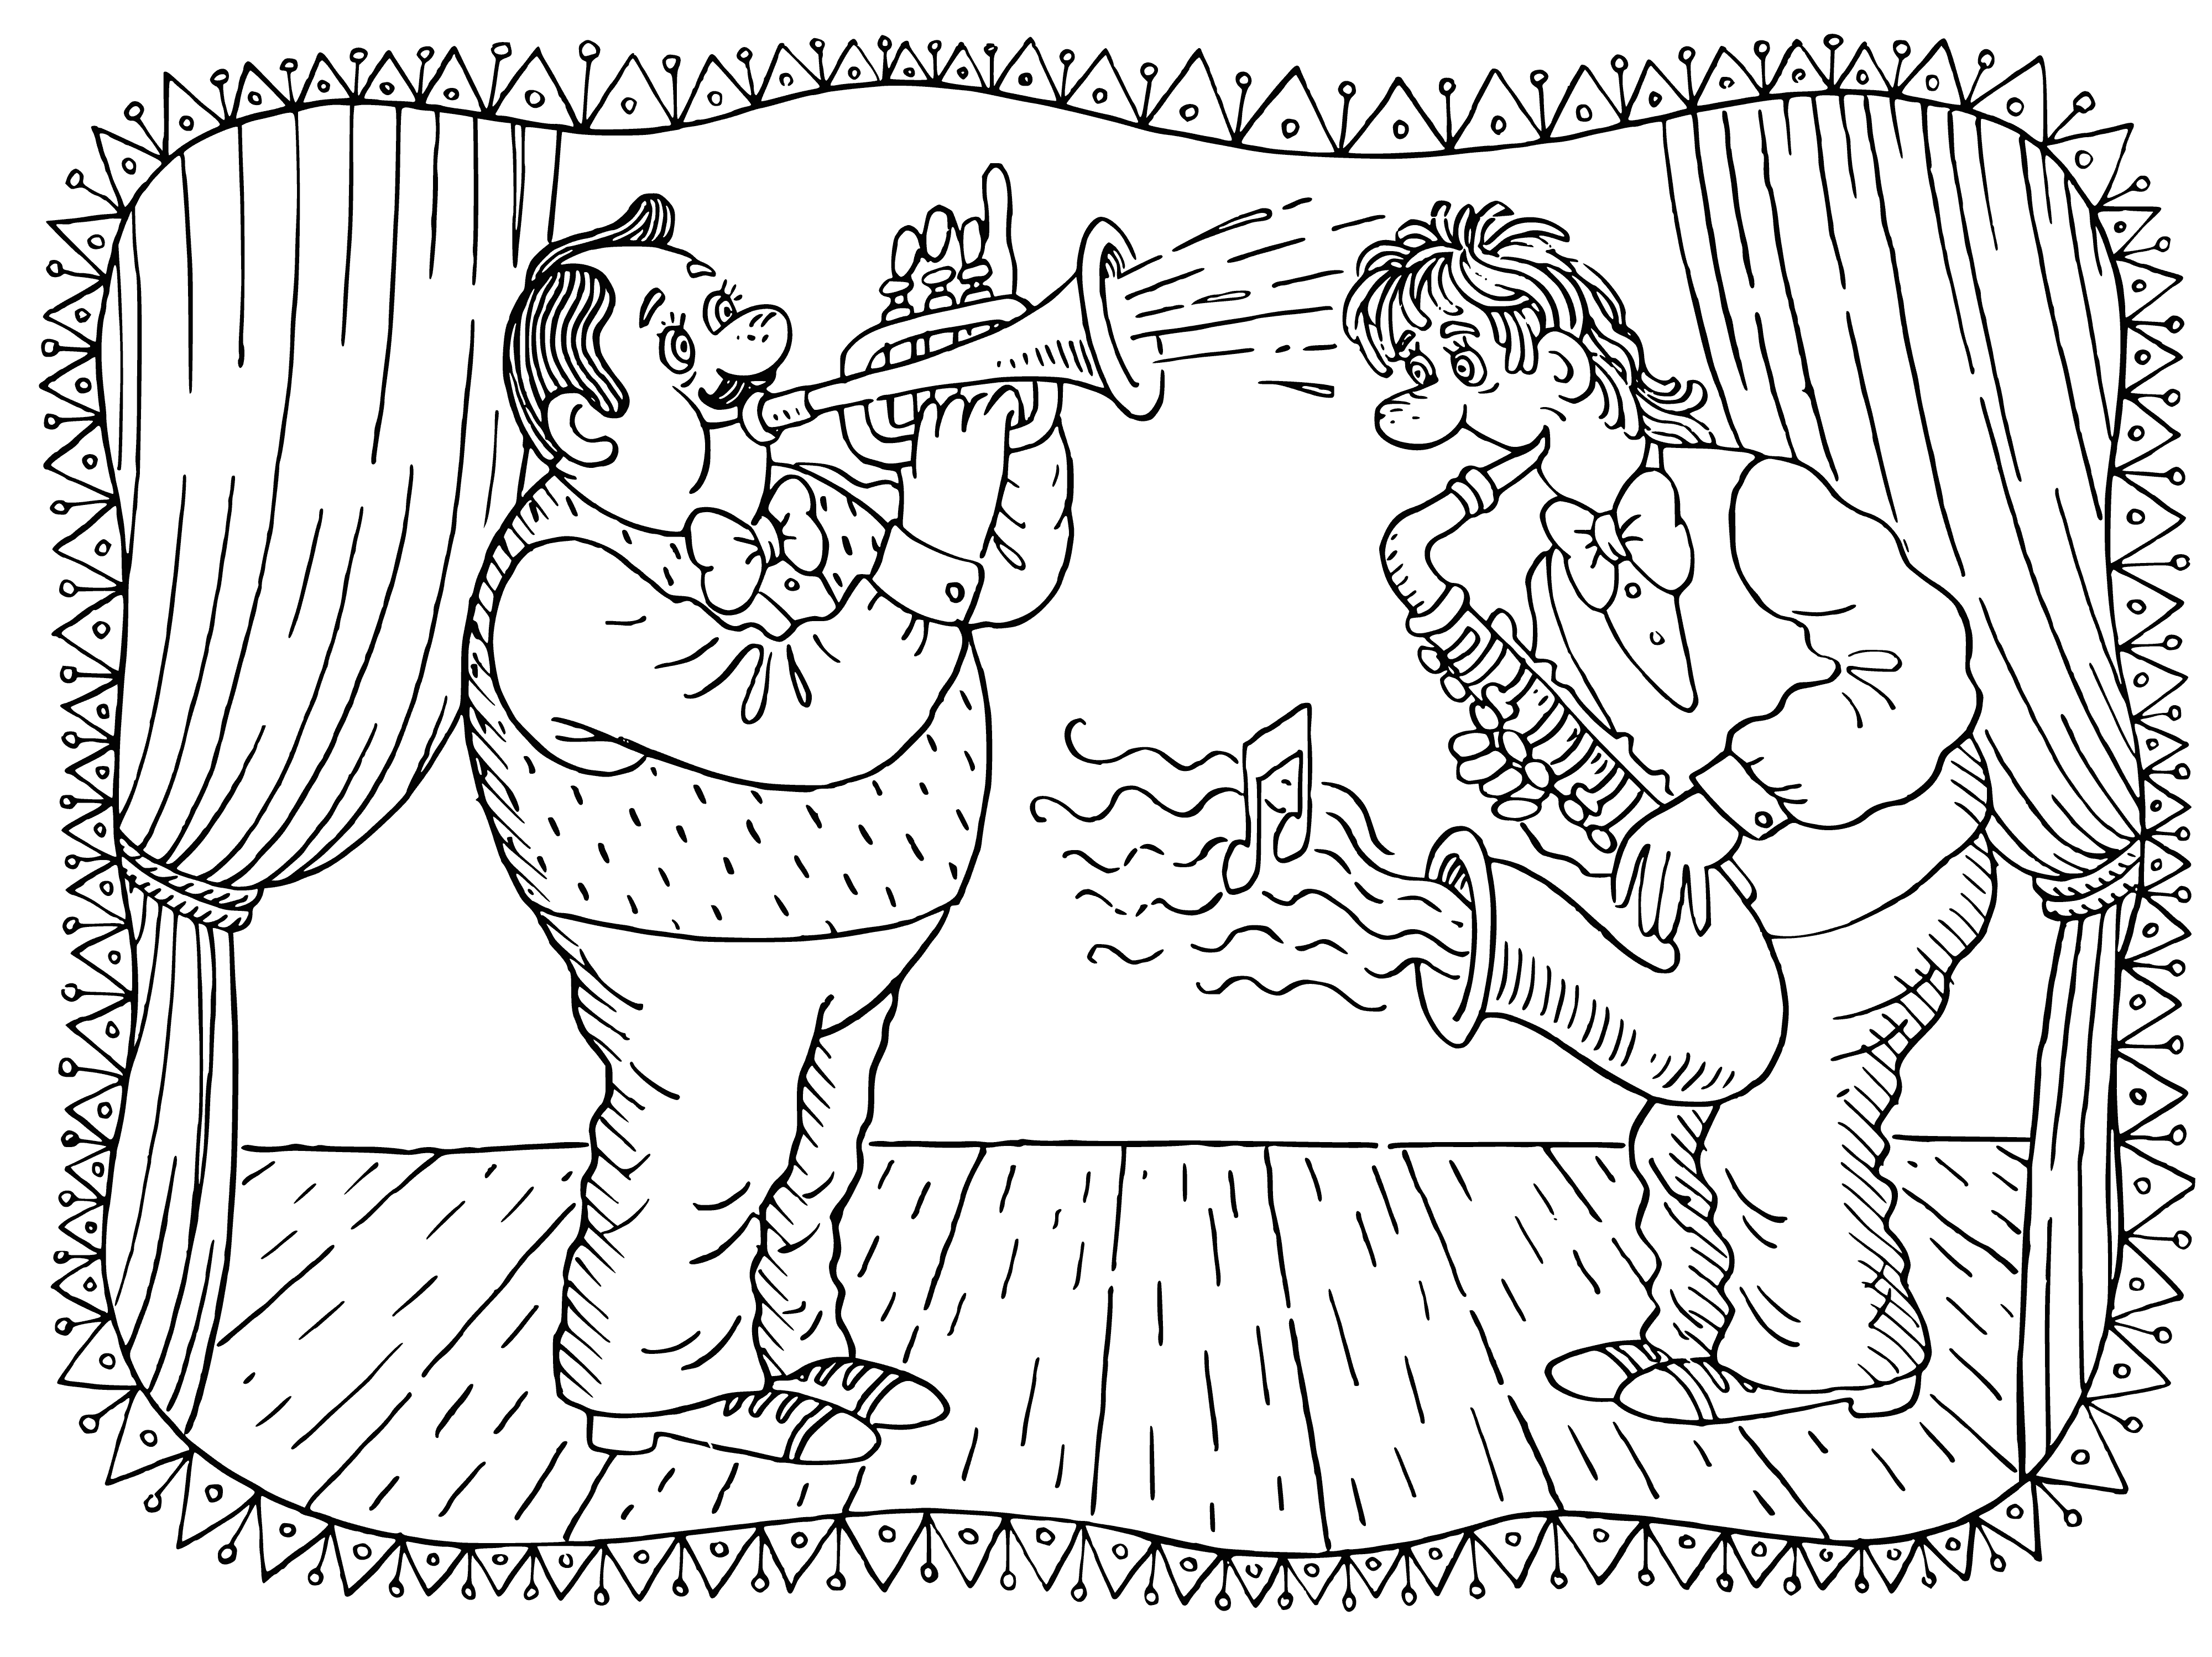 coloring page: Saxophone player in a black suit & white shirt plays jazz. Audience claps & cheers.